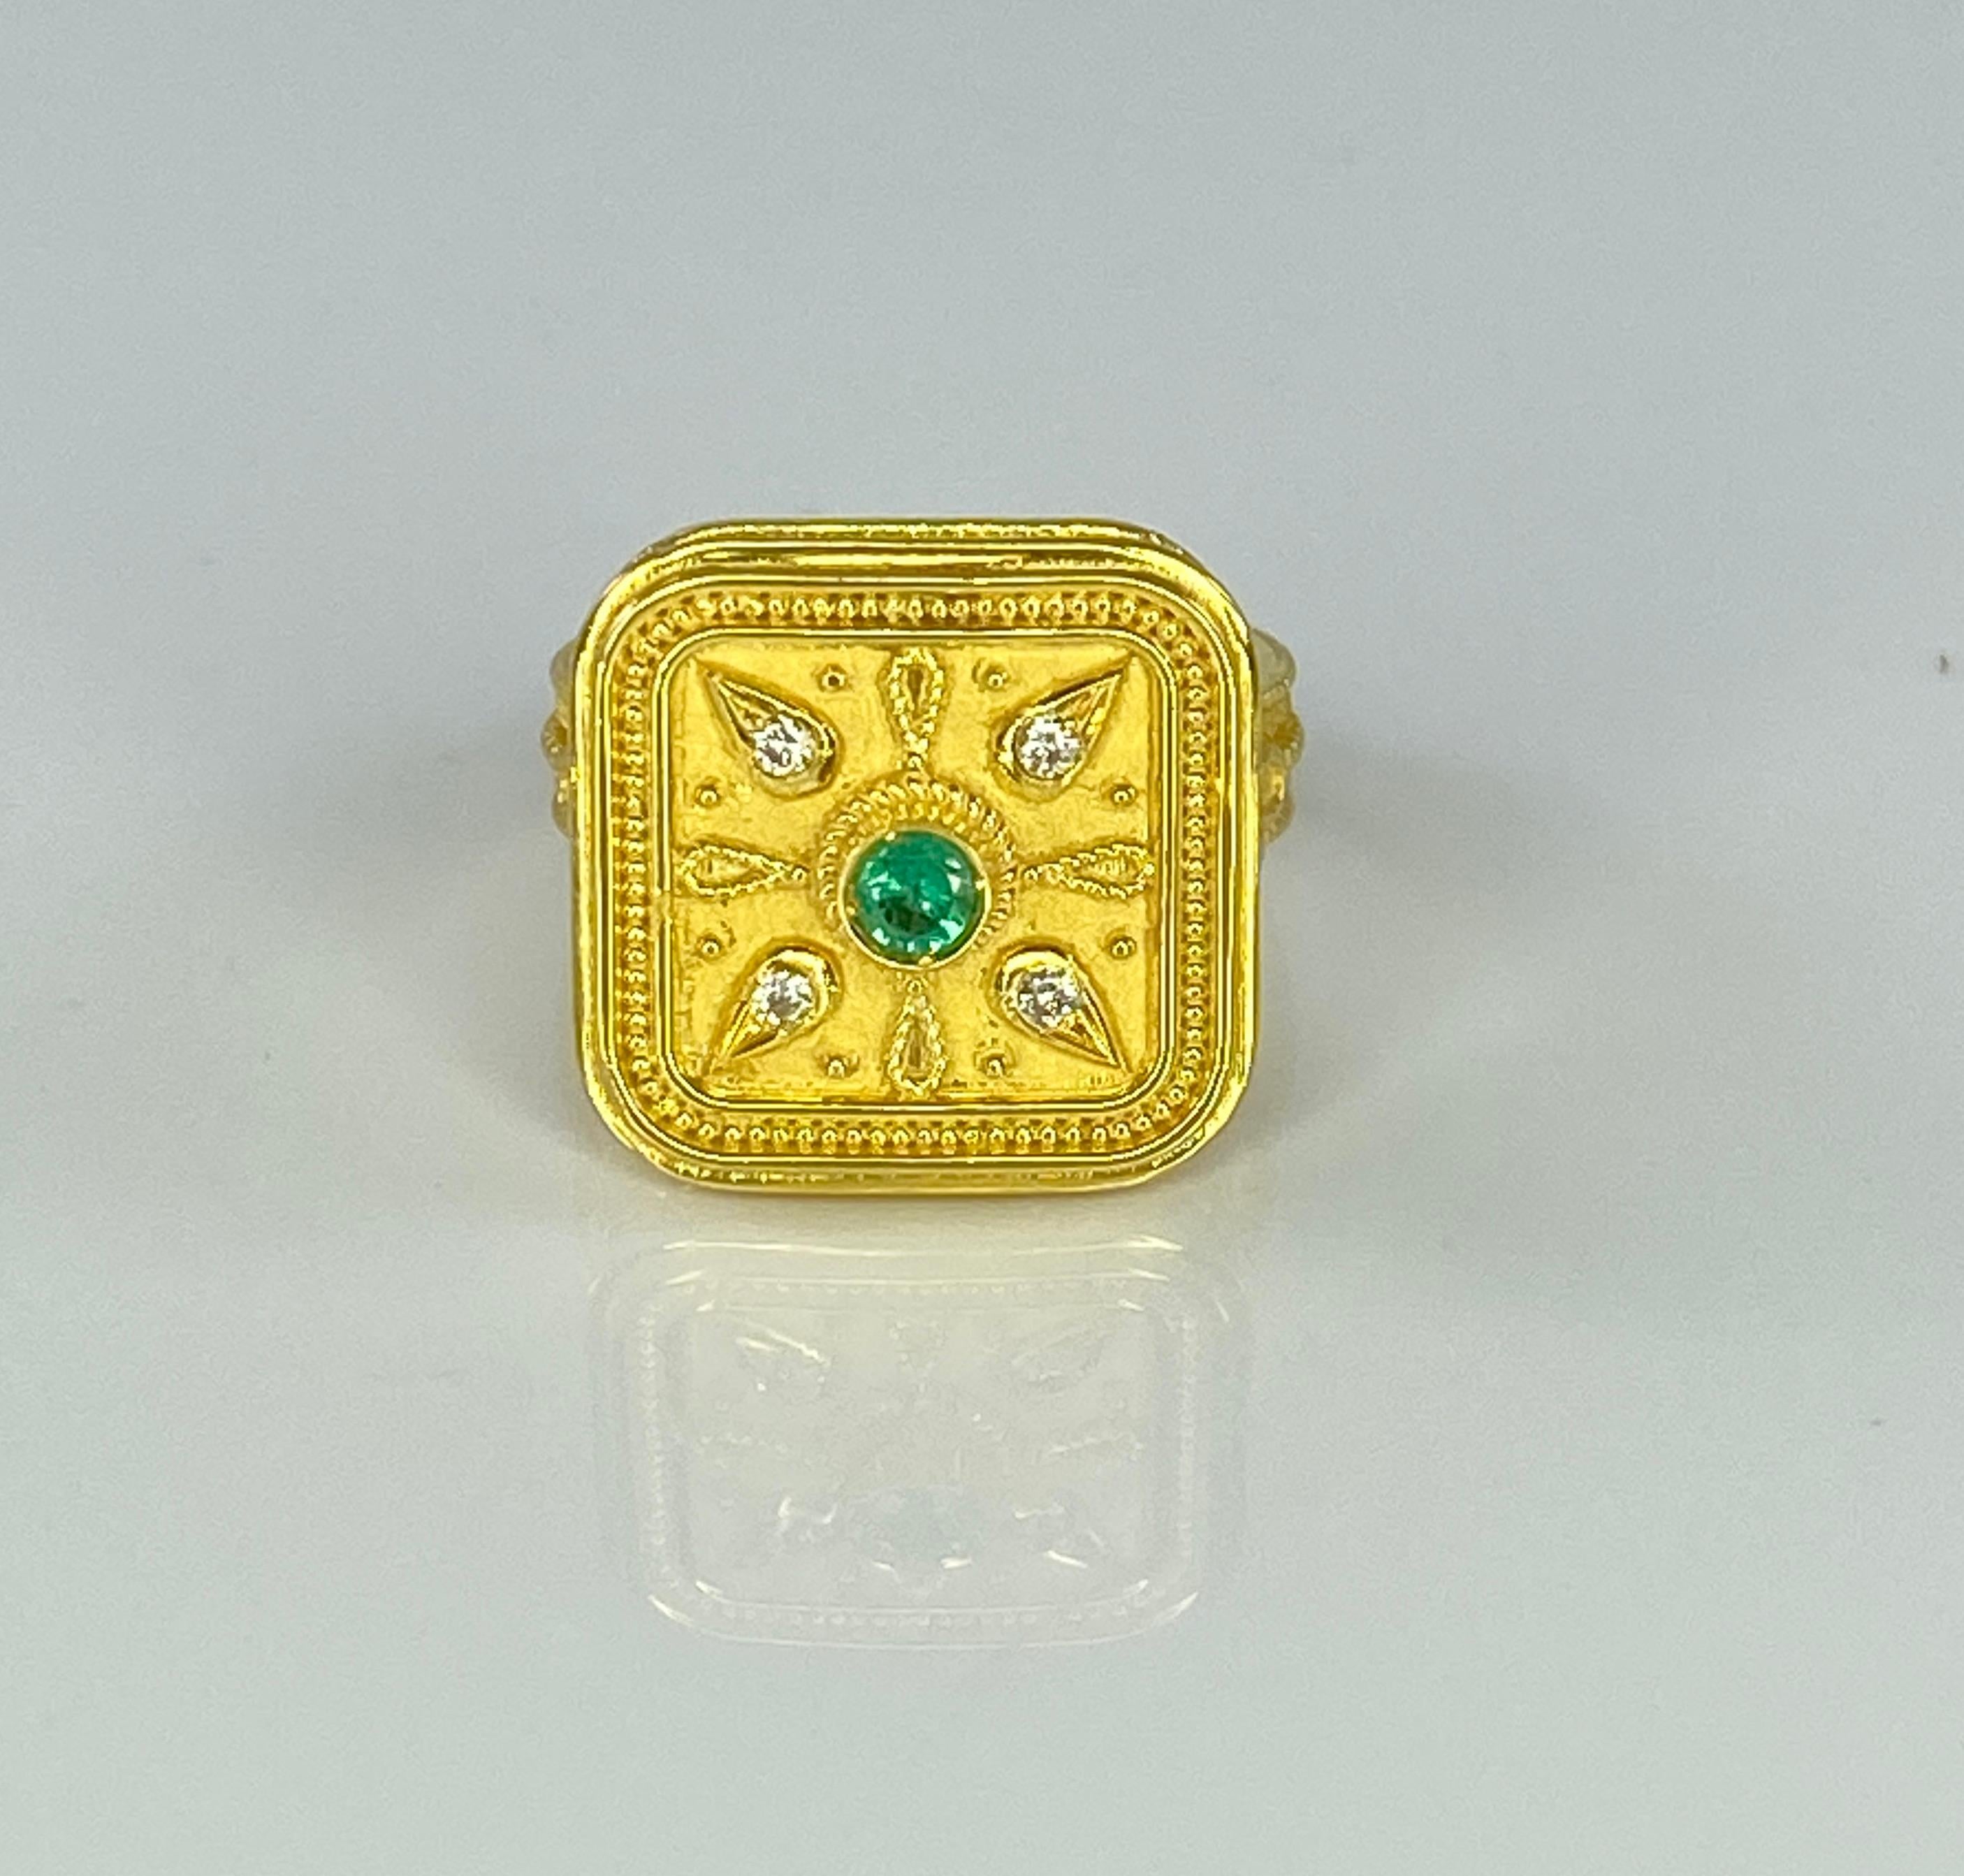 Presenting S.Georgios designer 18 Karat Solid Yellow Gold Ring all handmade with Byzantine Style workmanship where granulation and twisted wires stand out on a unique velvet background.  This ring is decorated with a 0.22-carat round Emerald center